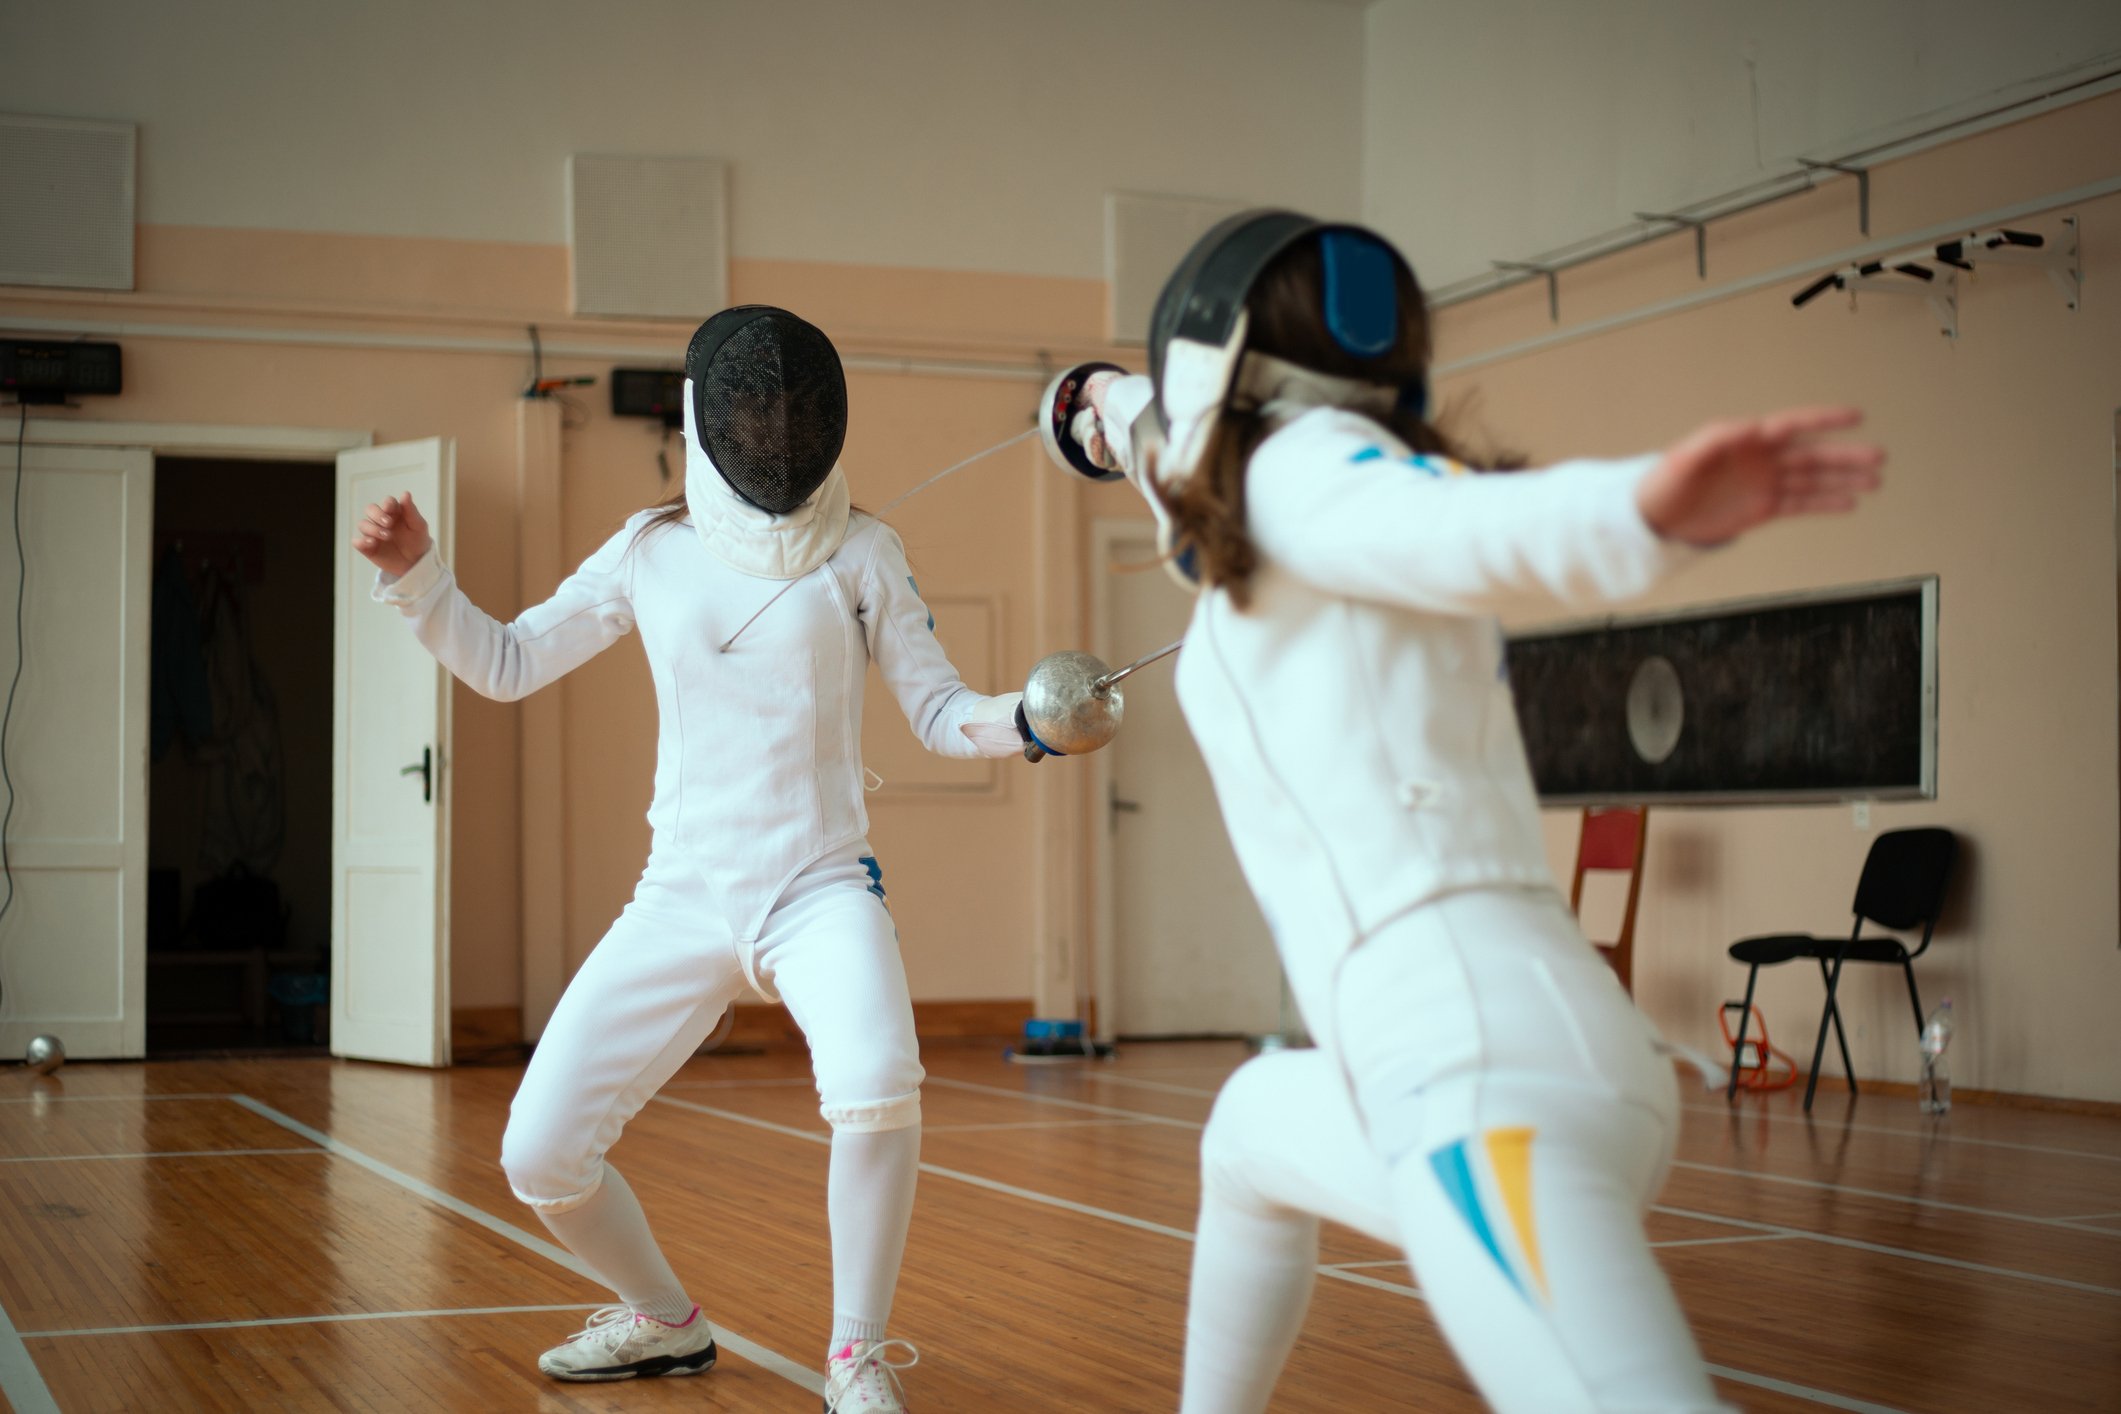 Two fencers in protective gear engaged in a match indoors